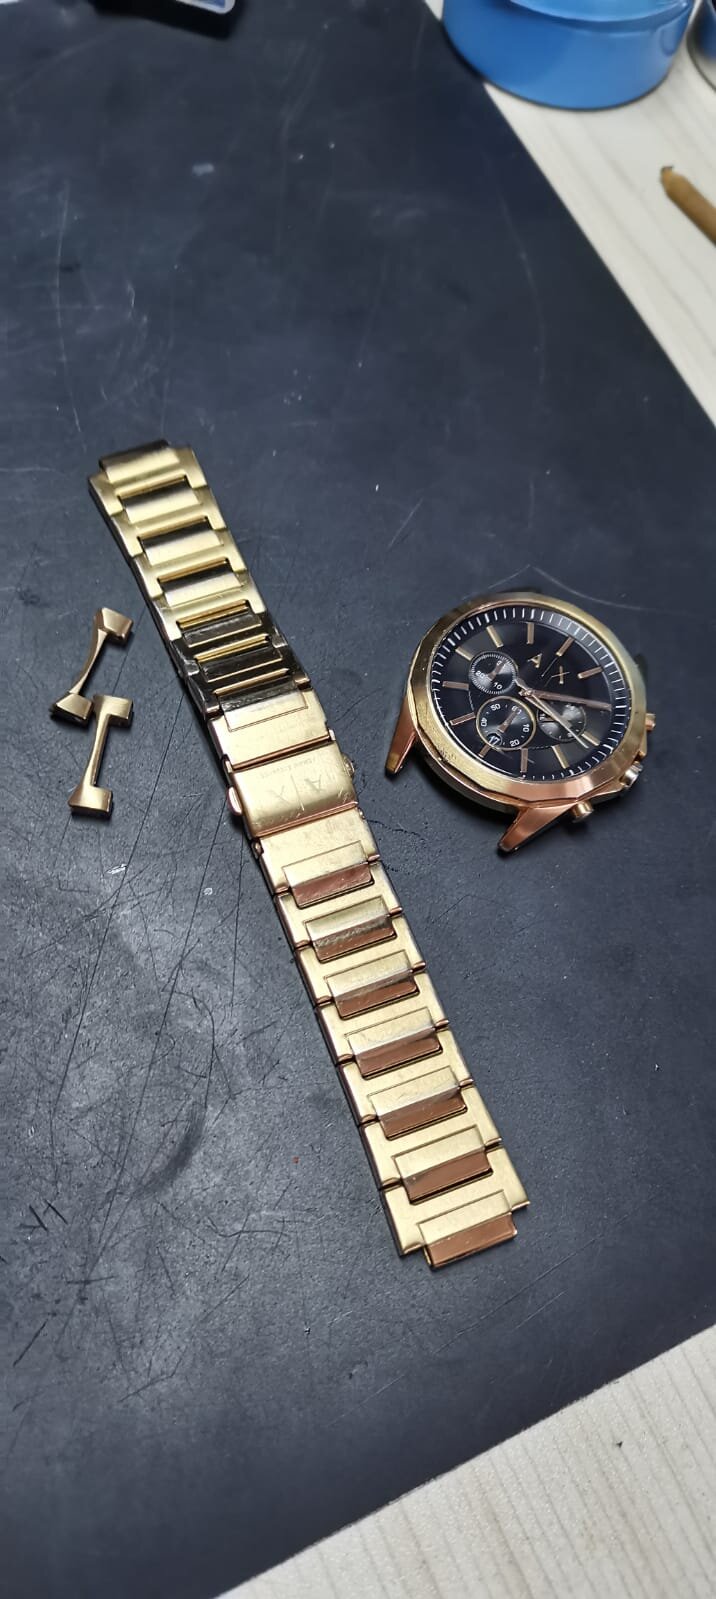 Armani Exchange AX clean watch from Fixed Repairs and 111811 repair | | Hub Watch glass new links in battery, Watches Latest Watch News for | North Watch | London. AX2611 removal